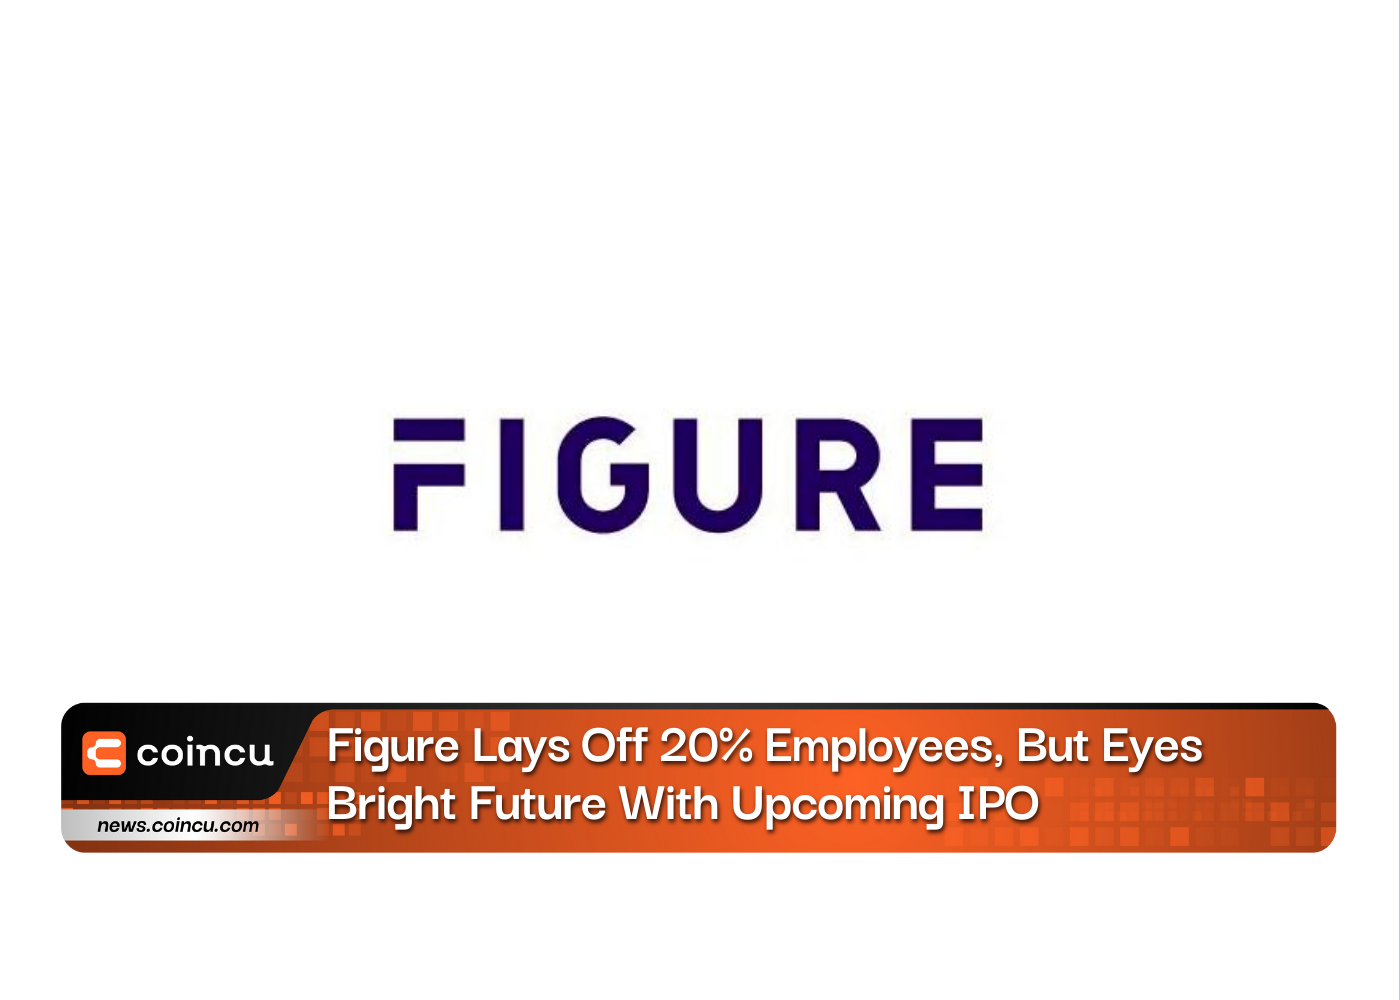 Figure Lays Off 20% Employees, But Eyes Bright Future With Upcoming IPO